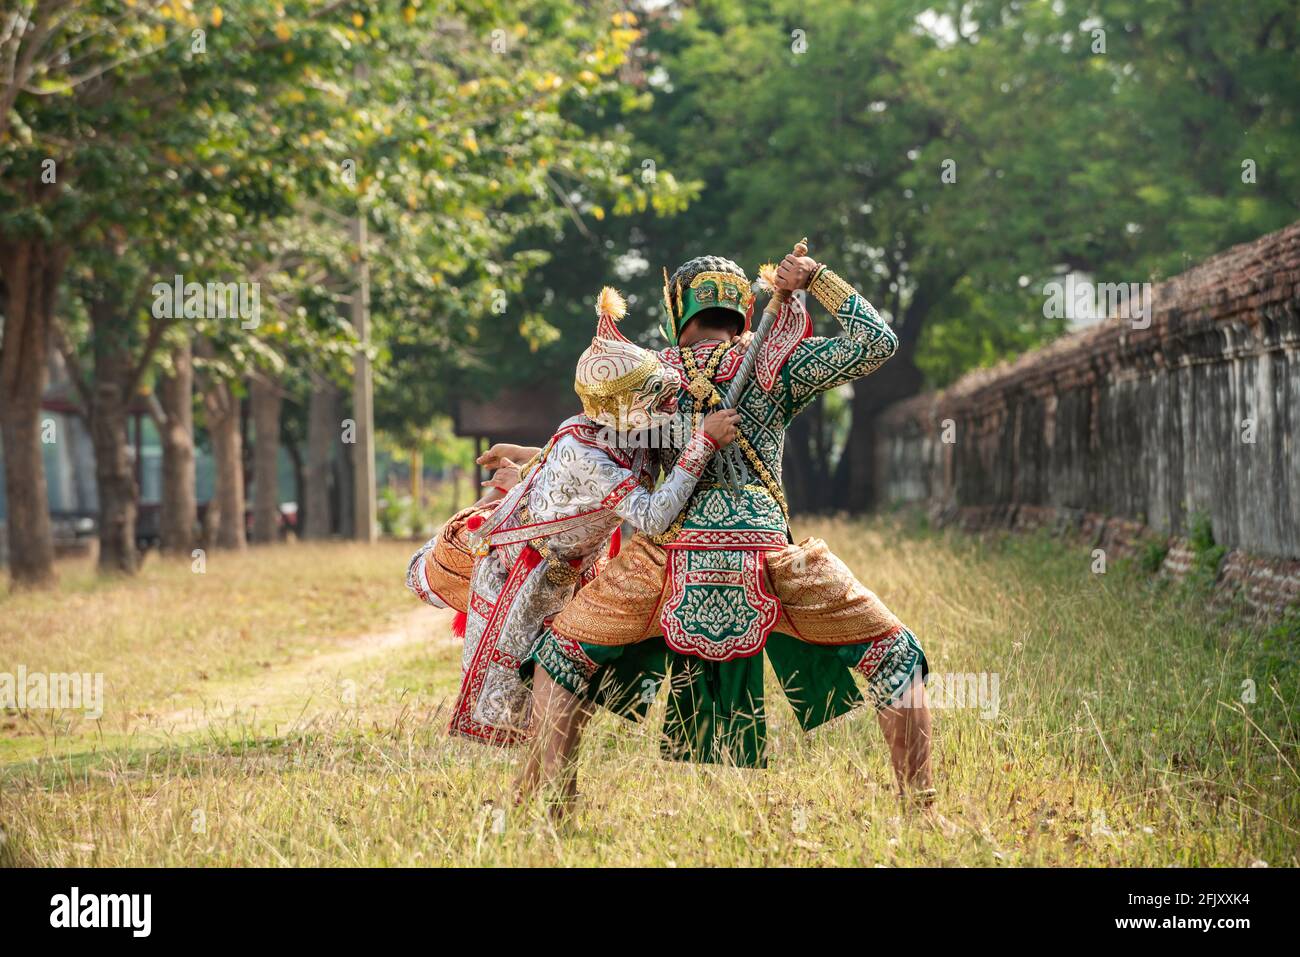 Khon art of culture Thailand Dancing in masked Ramayana Story. Stock Photo